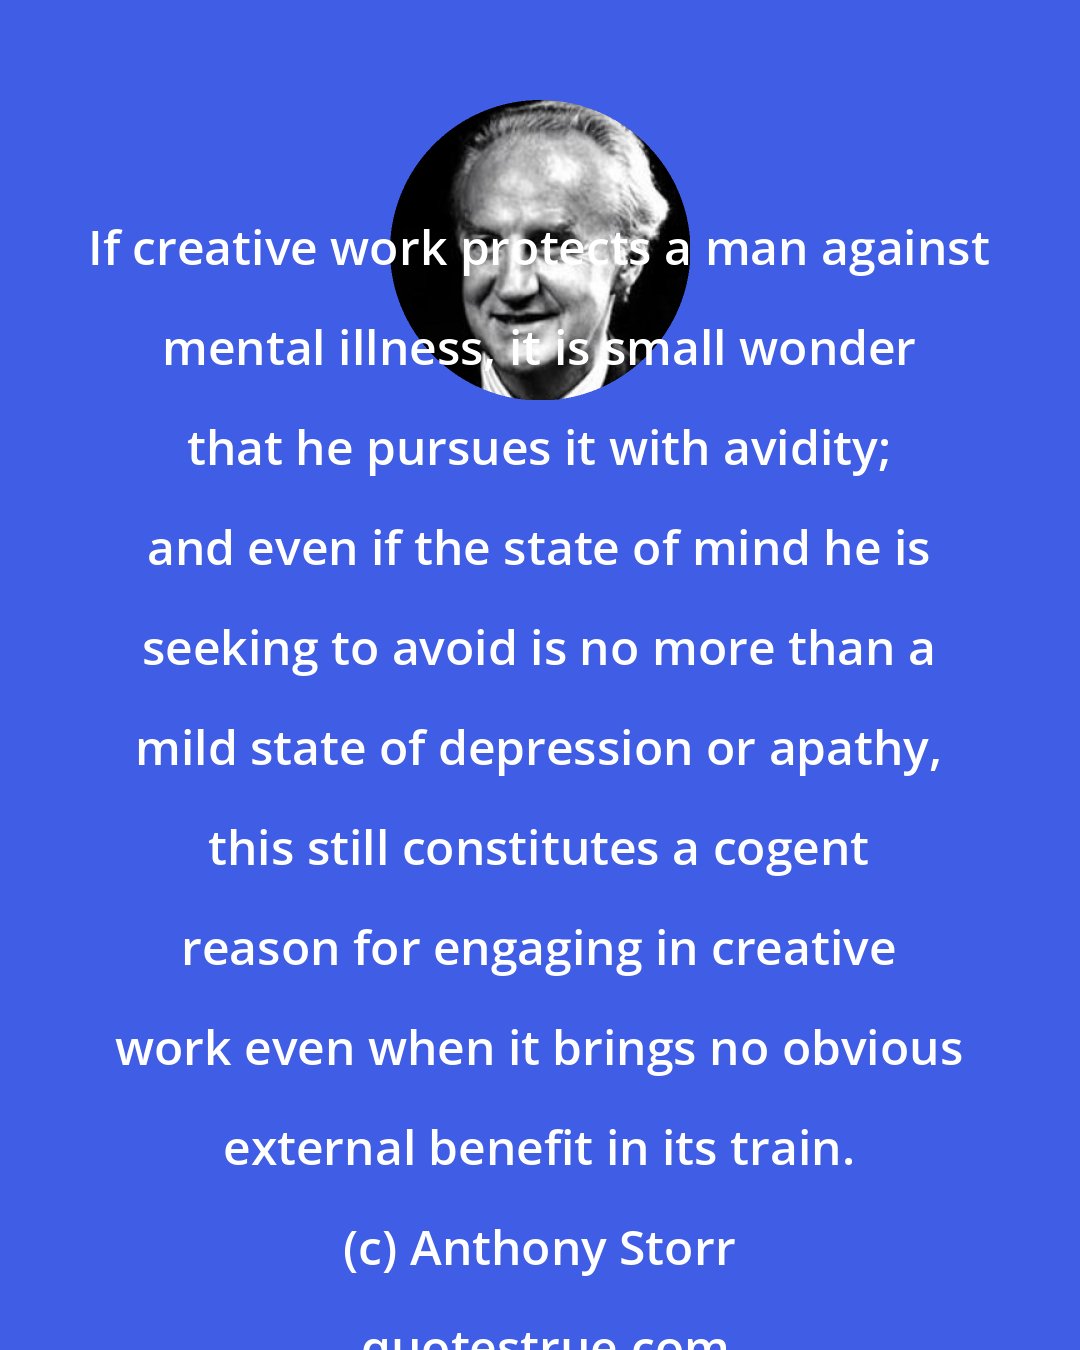 Anthony Storr: If creative work protects a man against mental illness, it is small wonder that he pursues it with avidity; and even if the state of mind he is seeking to avoid is no more than a mild state of depression or apathy, this still constitutes a cogent reason for engaging in creative work even when it brings no obvious external benefit in its train.